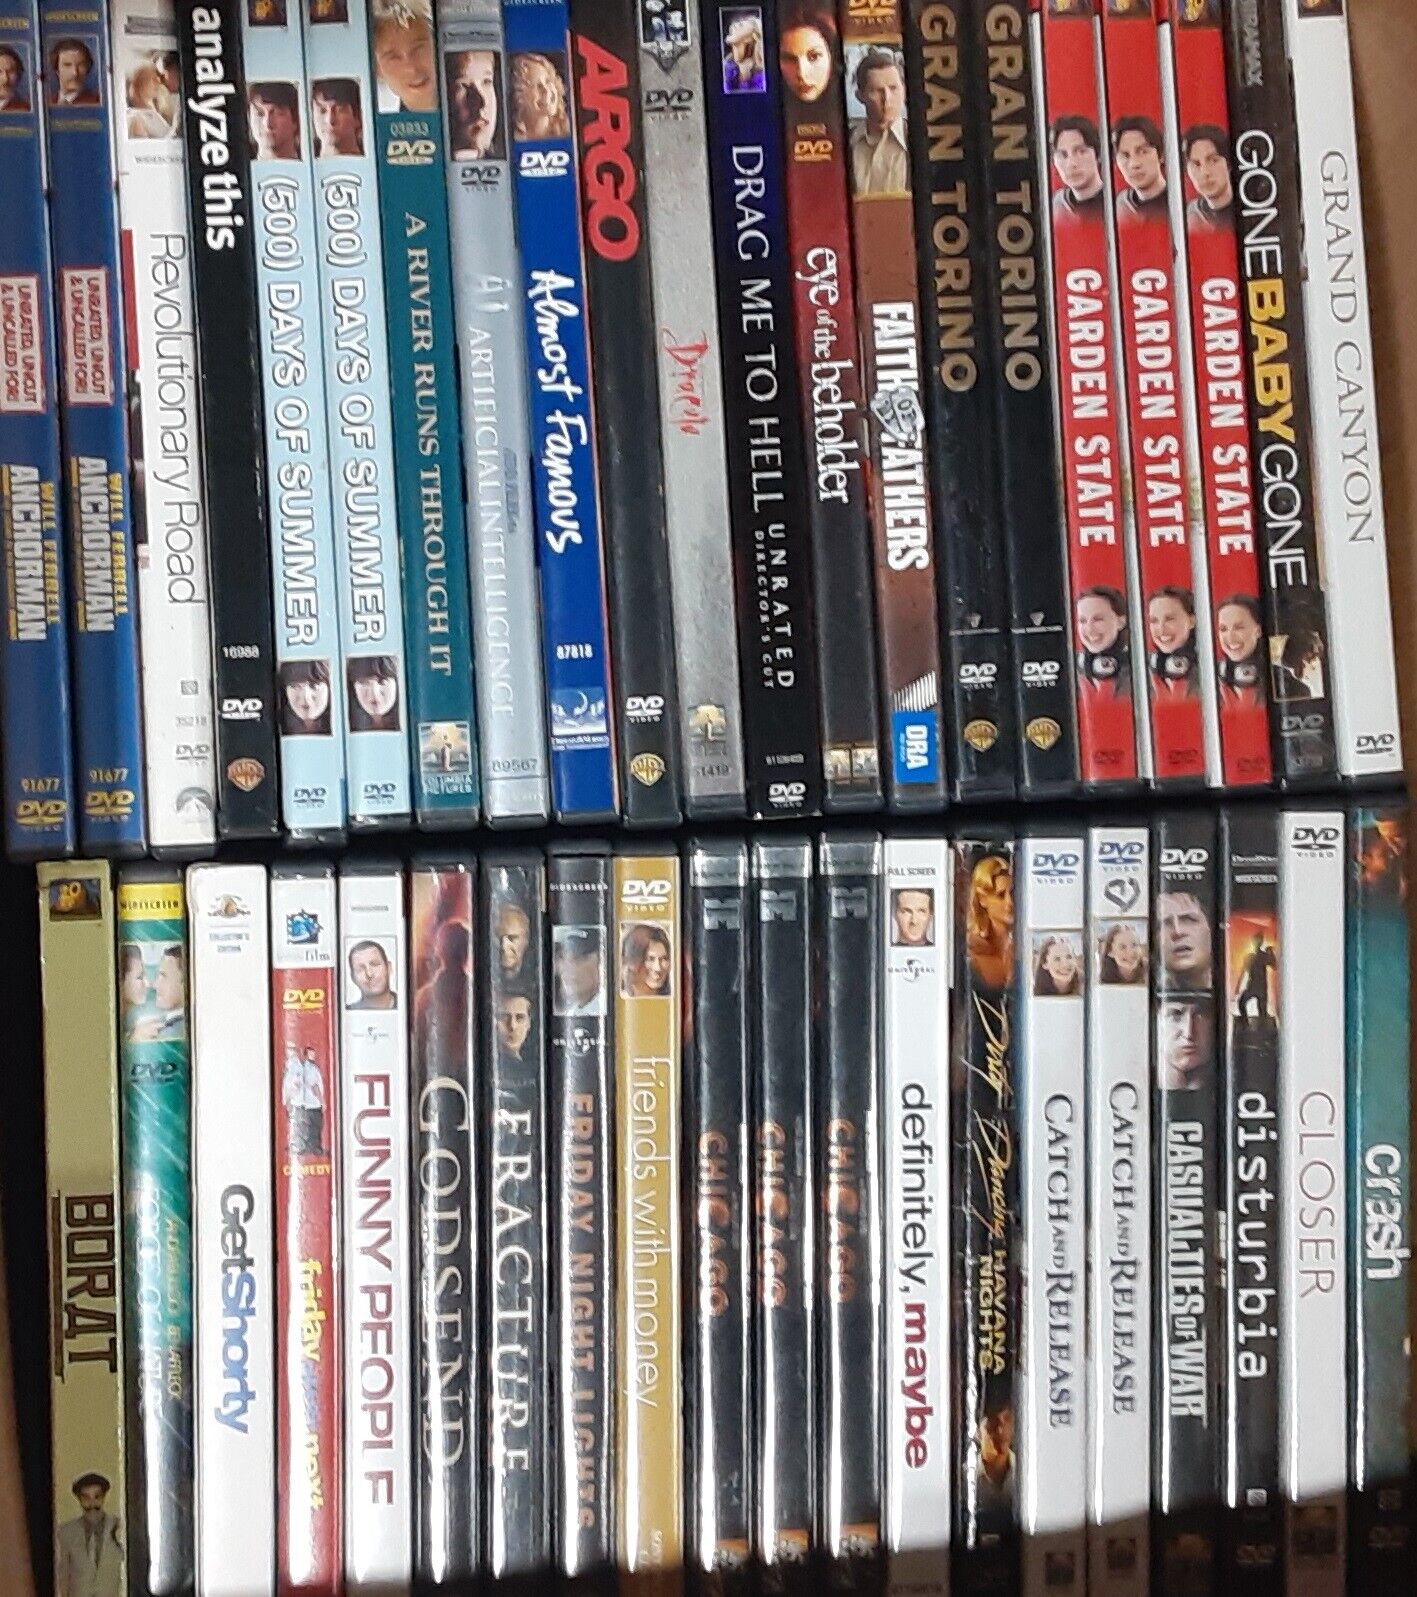 DVD Blowout Sale Various Genres- 2 for $6!  3 for $7.50!  4 